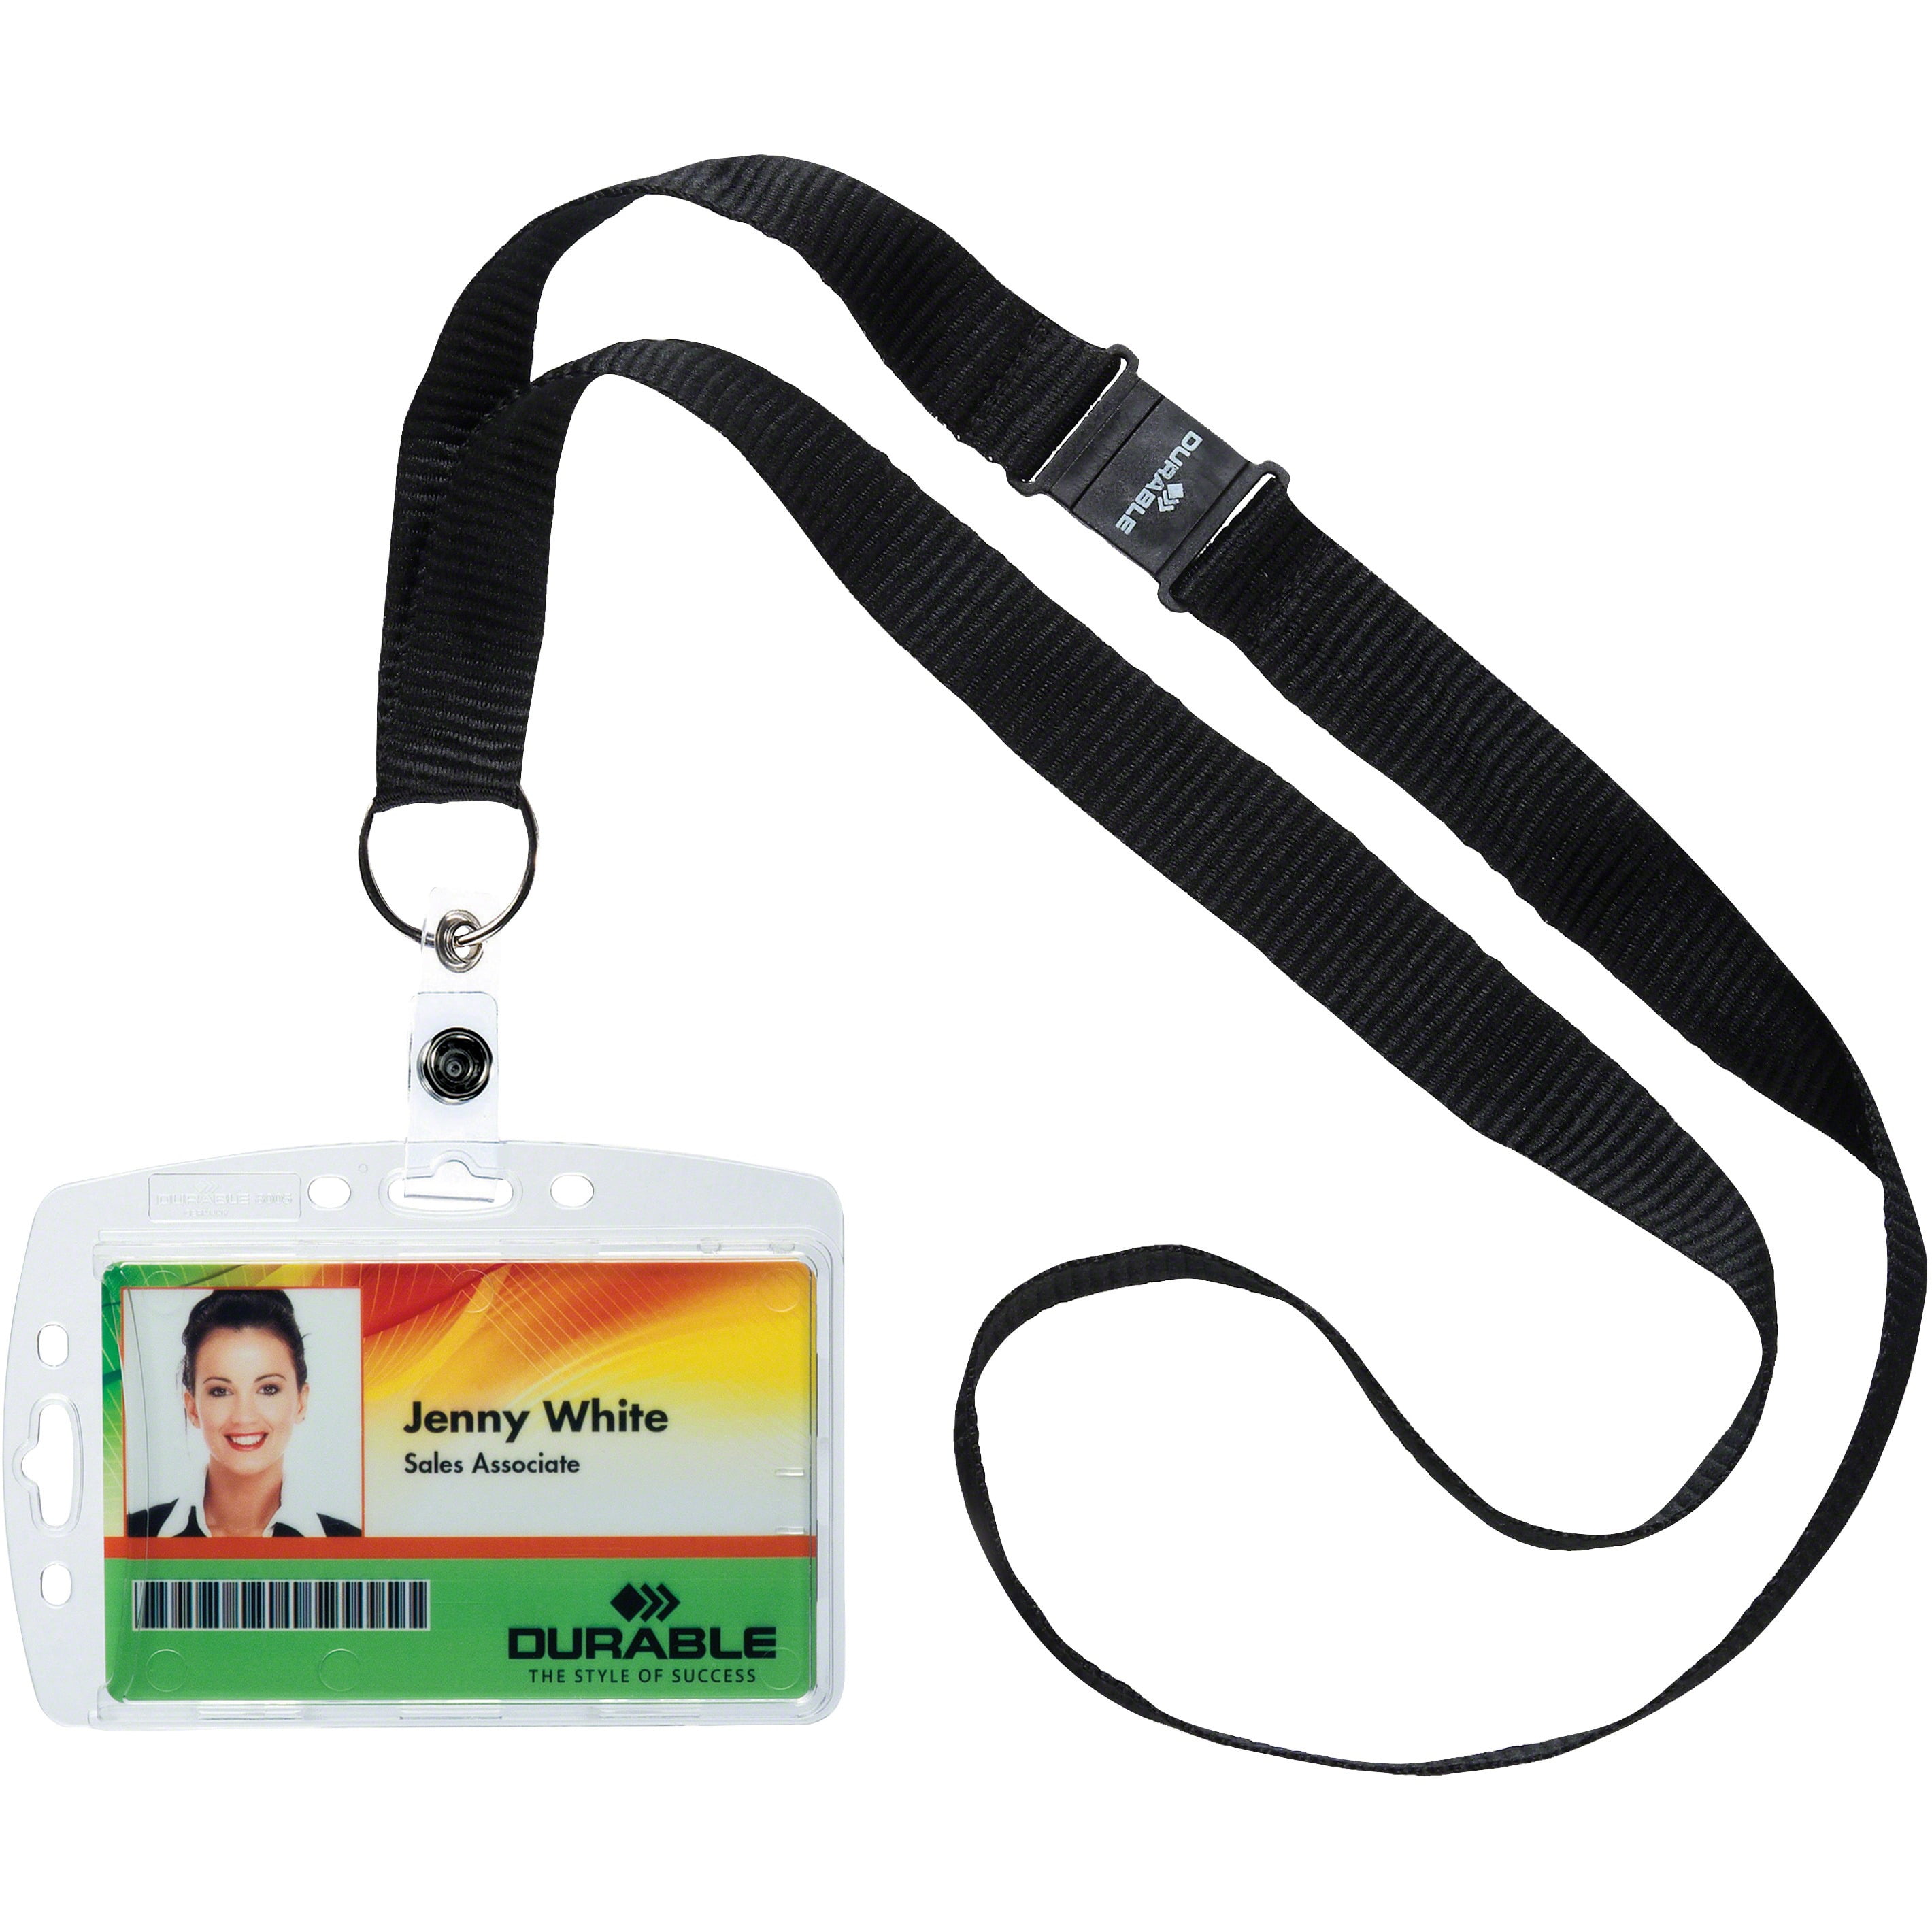 Bulk 100 Pack - Clear Vertical Large 4x6 Credential ID Badge Holders (3 1/2  x 5 1/4 Insert) with Premium Bulldog Clip Lanyards for VIP, Press Pass,  Tickets & More by Specialist ID (Black) 